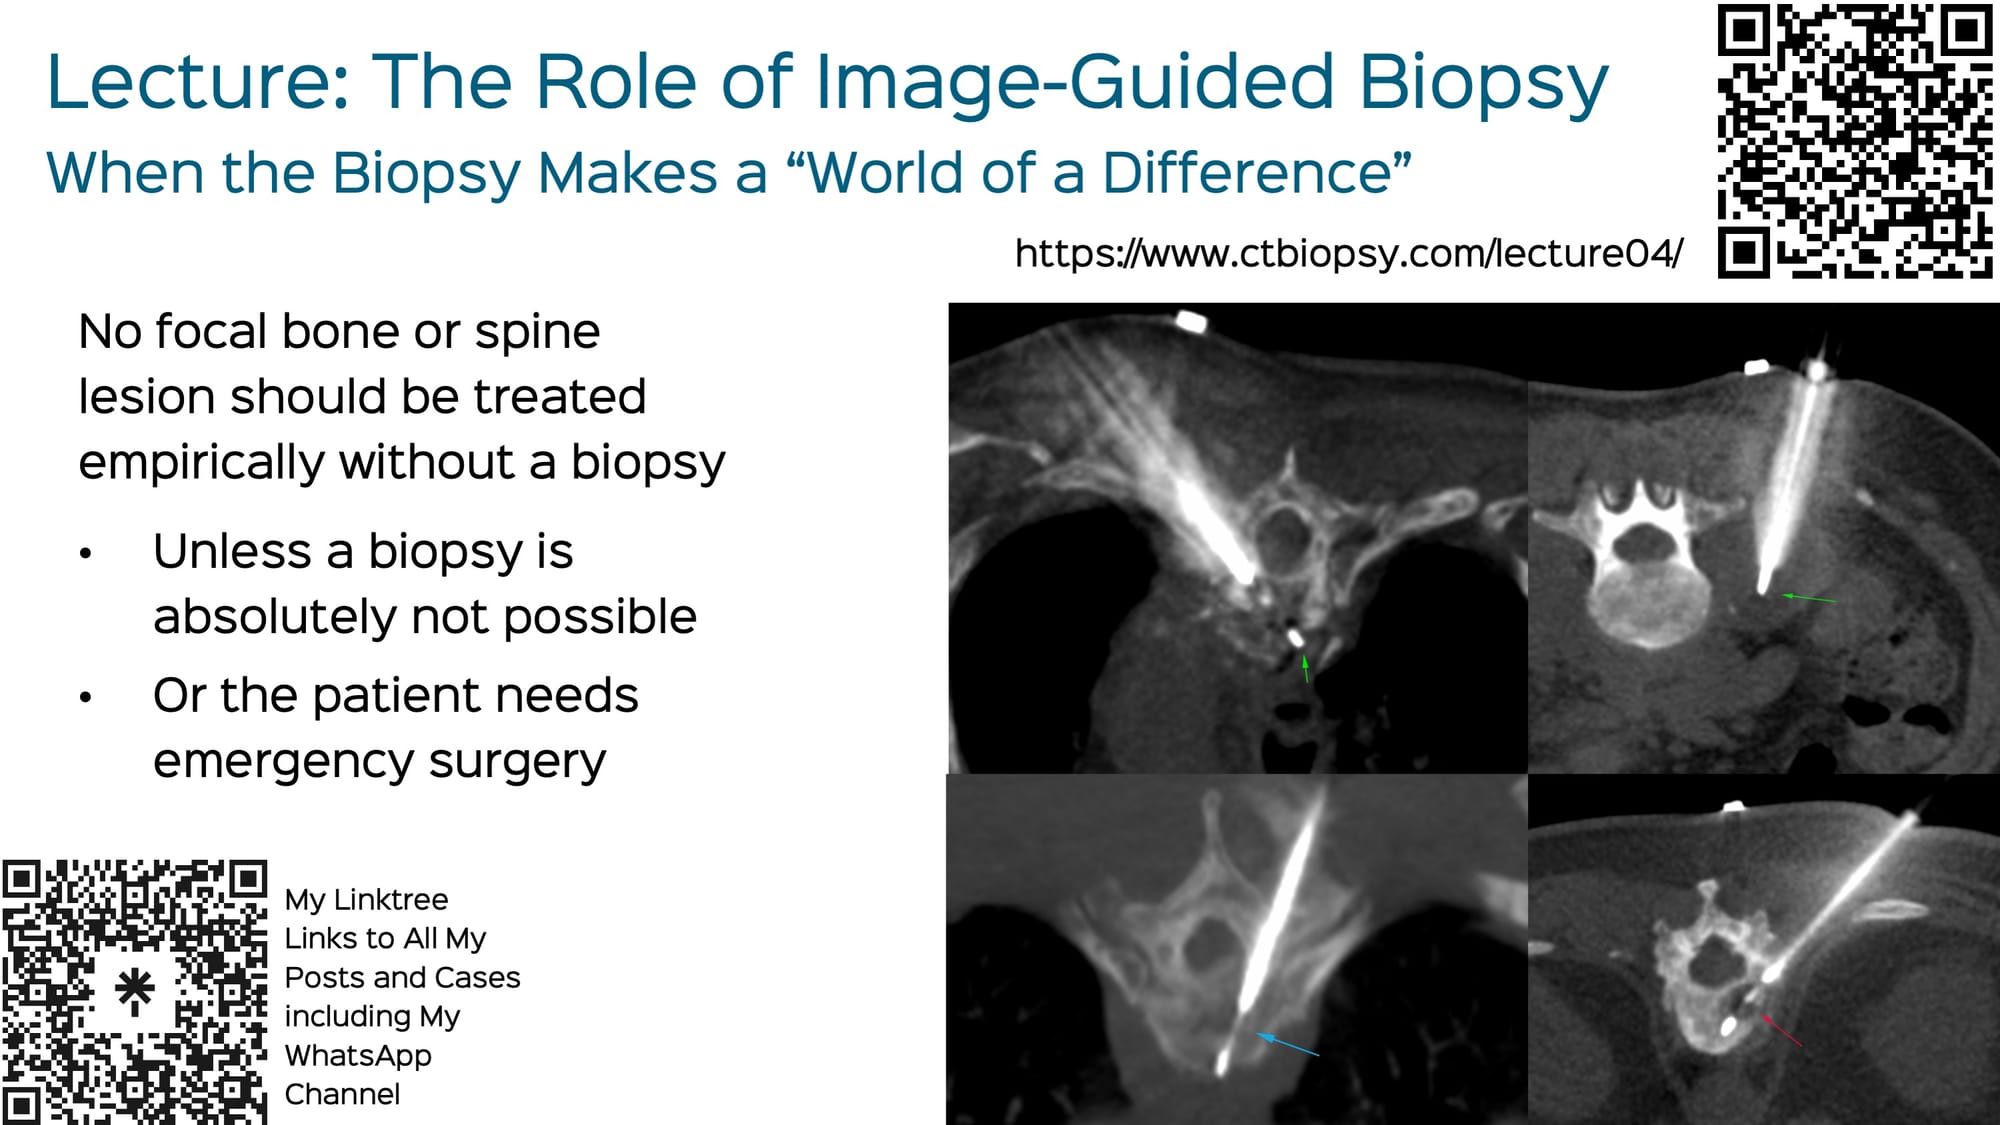 Lecture: The Role of Image-Guided Biopsy - When the Biopsy Makes the "World of a Difference"